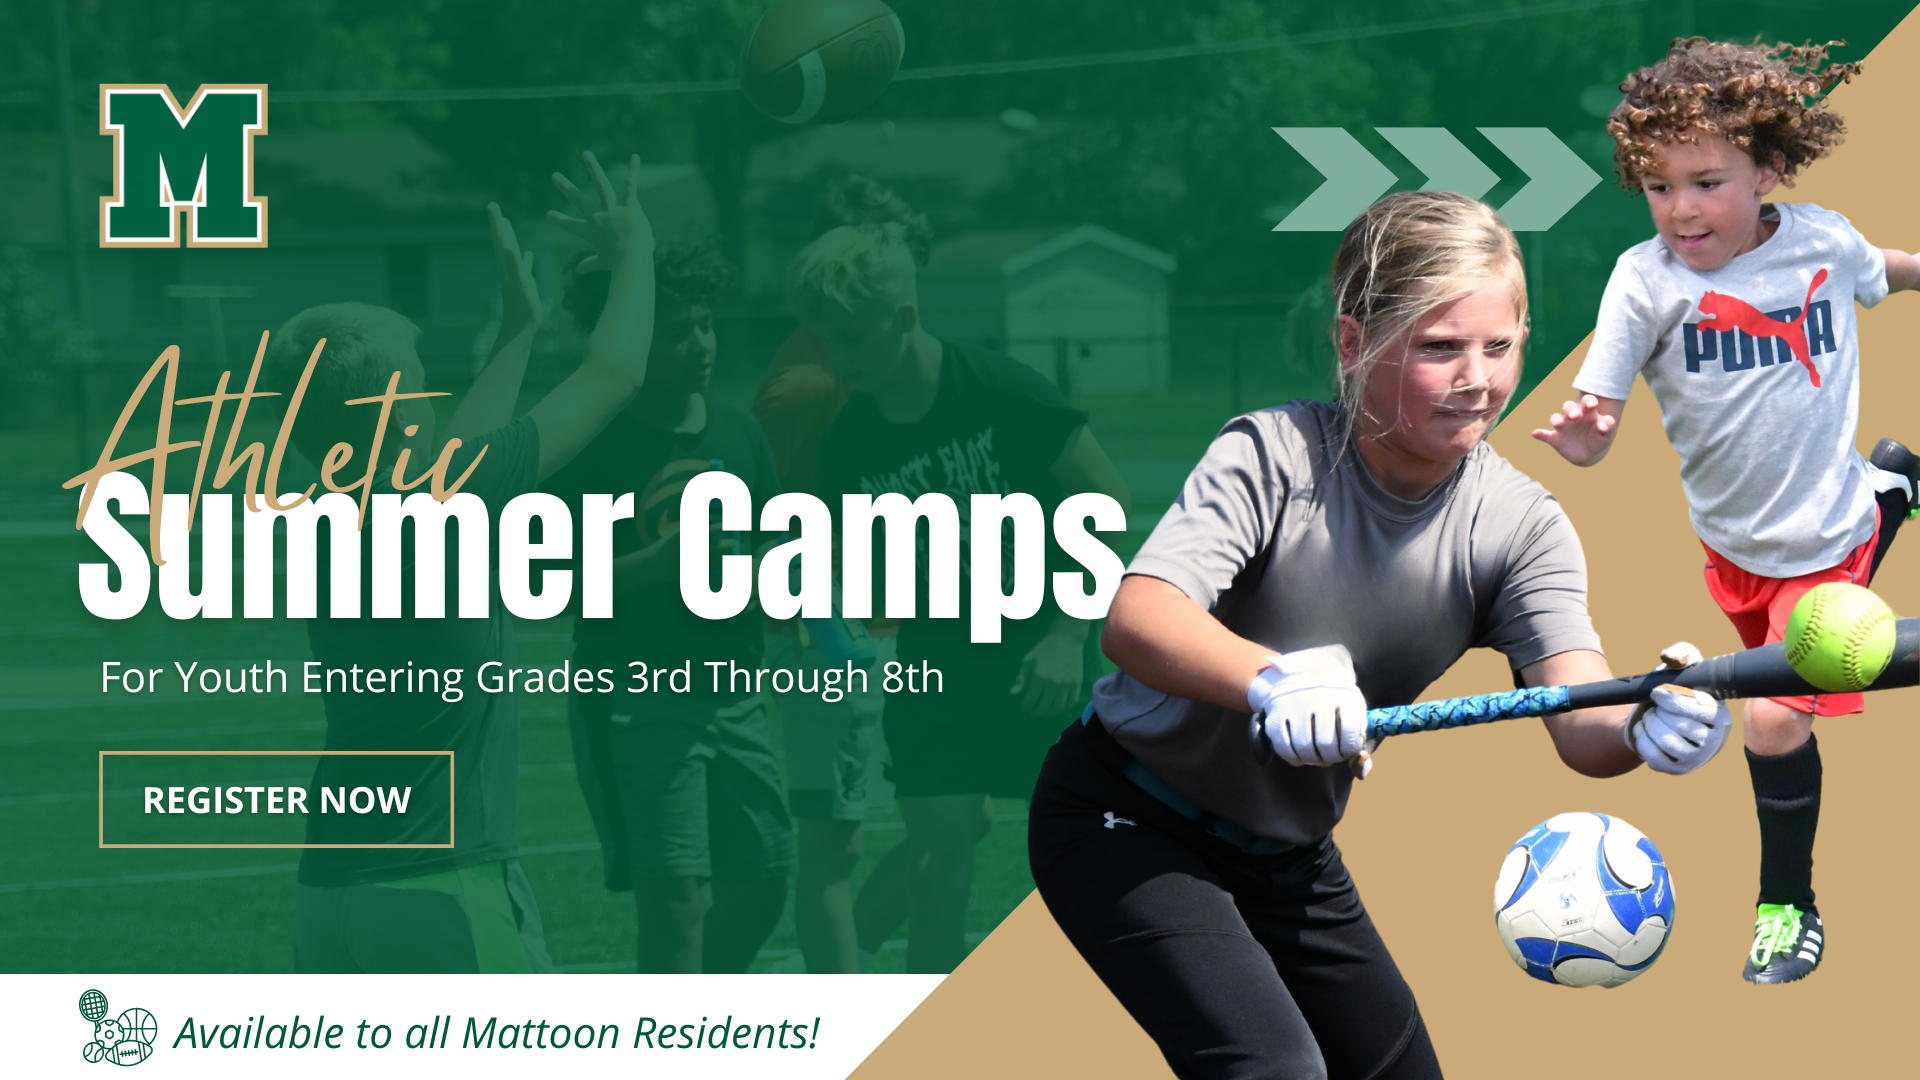 Athletic Sumer Camps for Mattoon Resident Youth Entering Grades 3-8th Grades